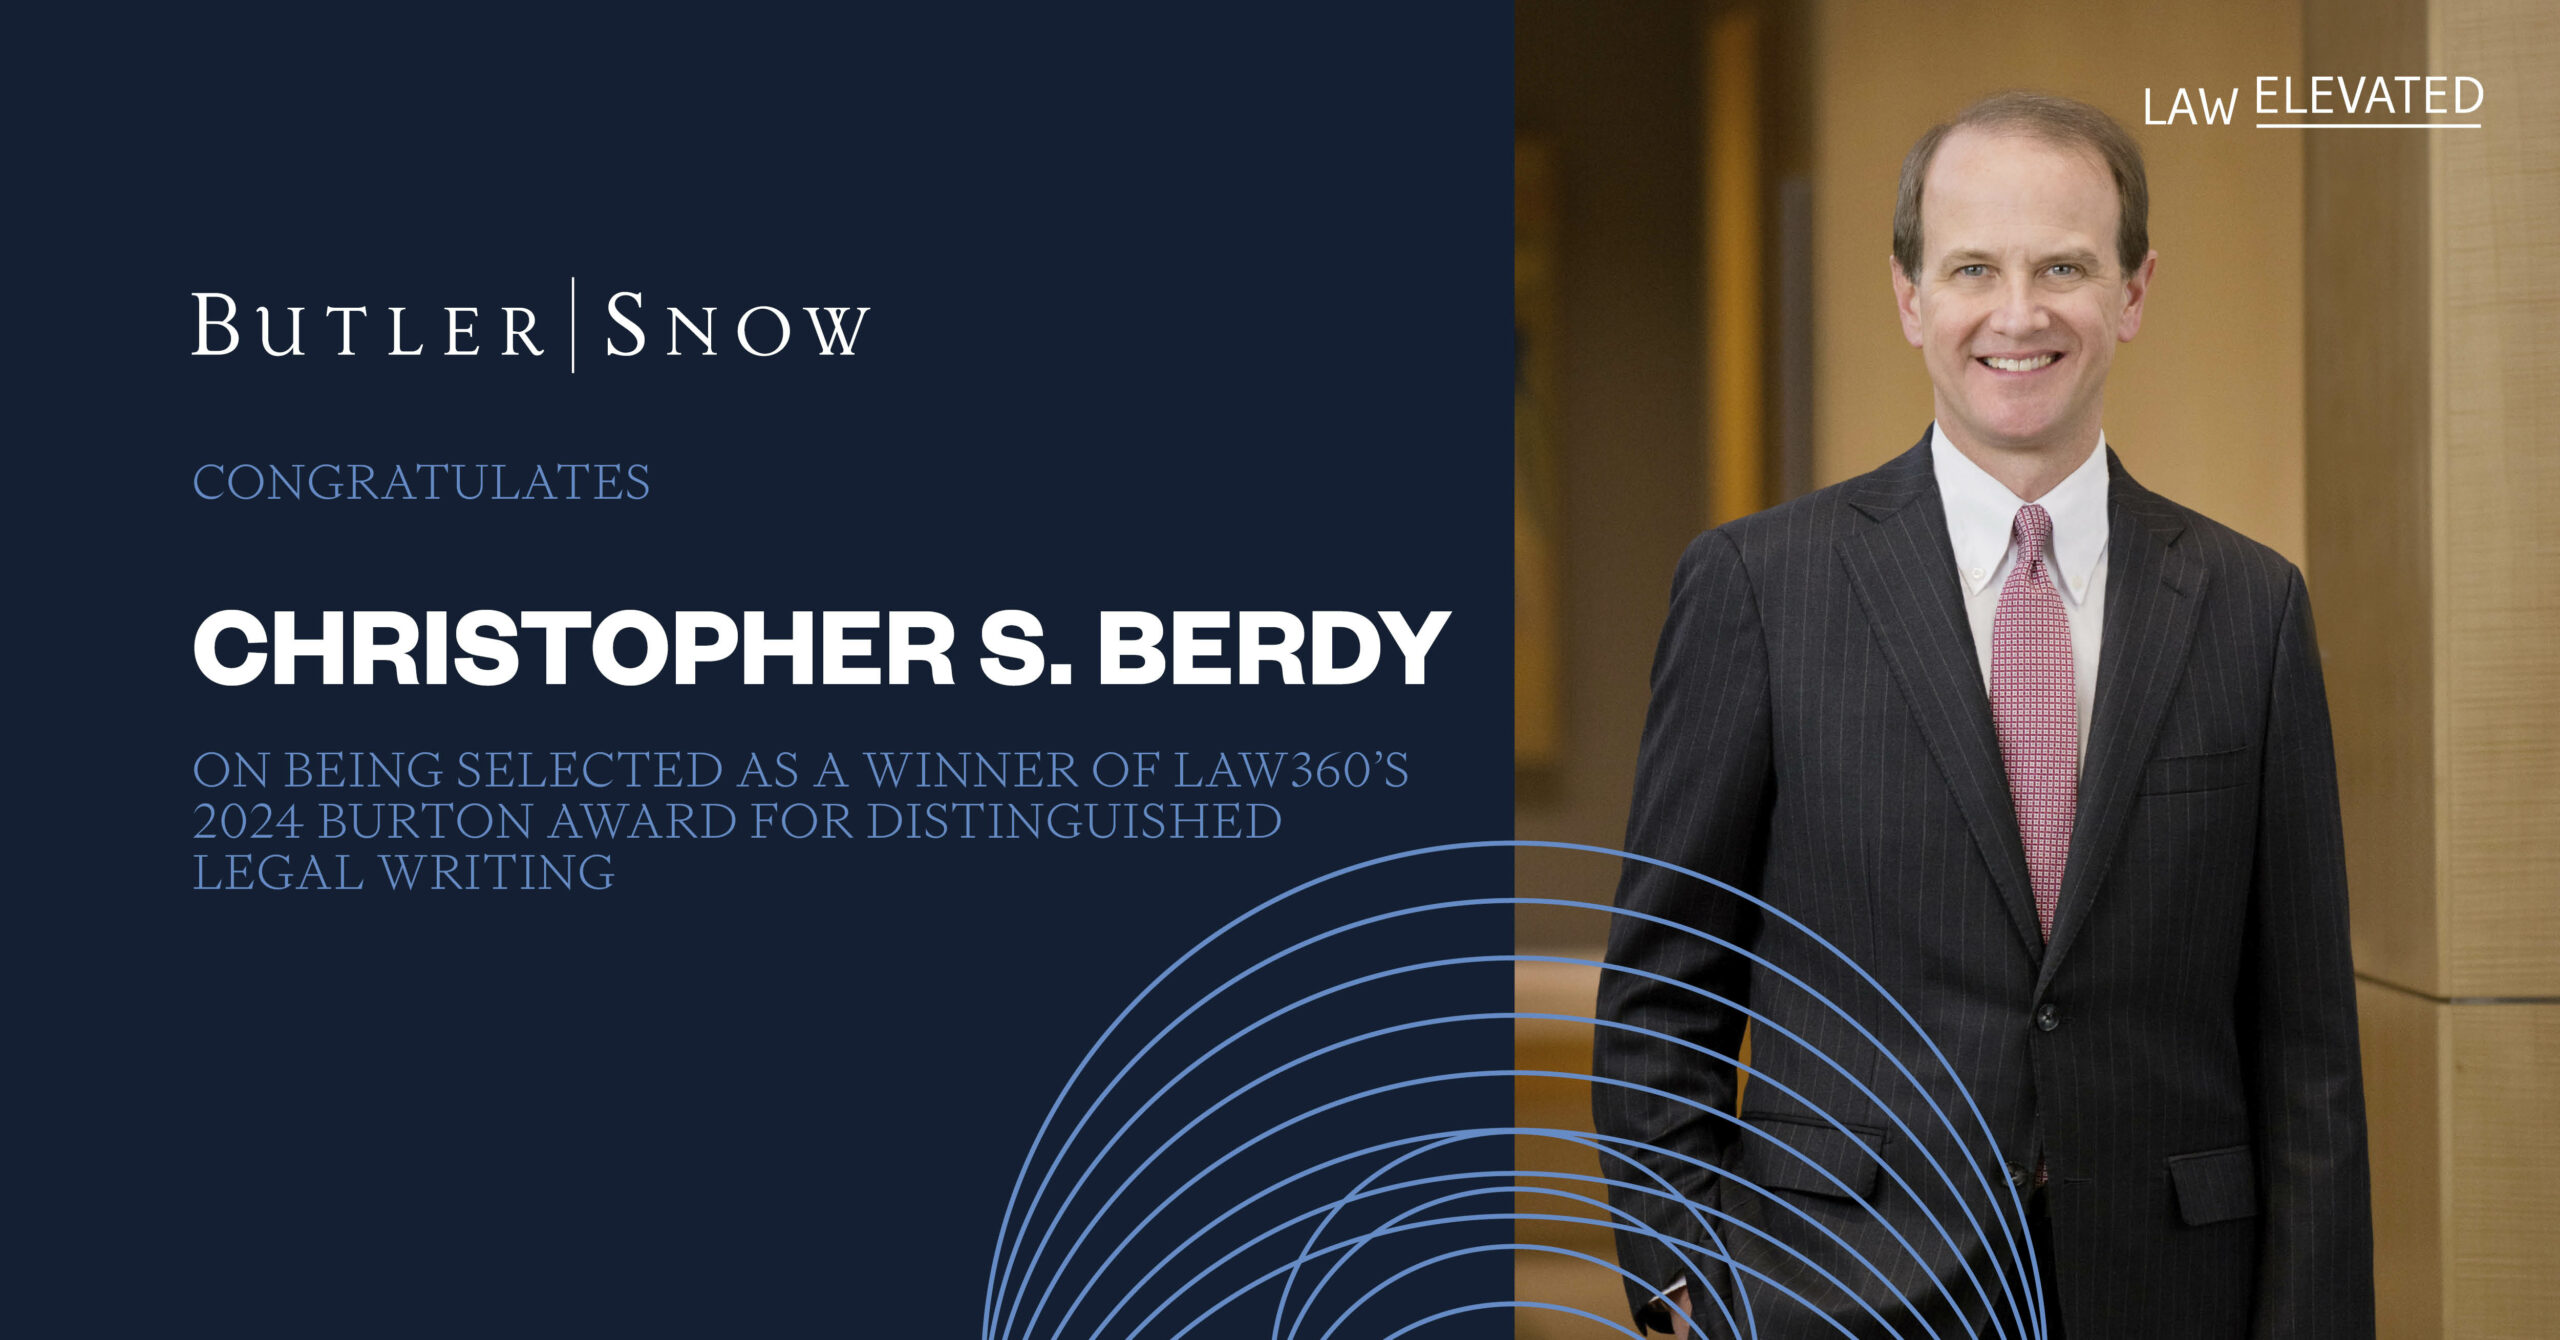 Butler Snow Attorney Christopher S. Berdy Selected Winner of Law360’s 2024 Burton Award for Distinguished Legal Writing